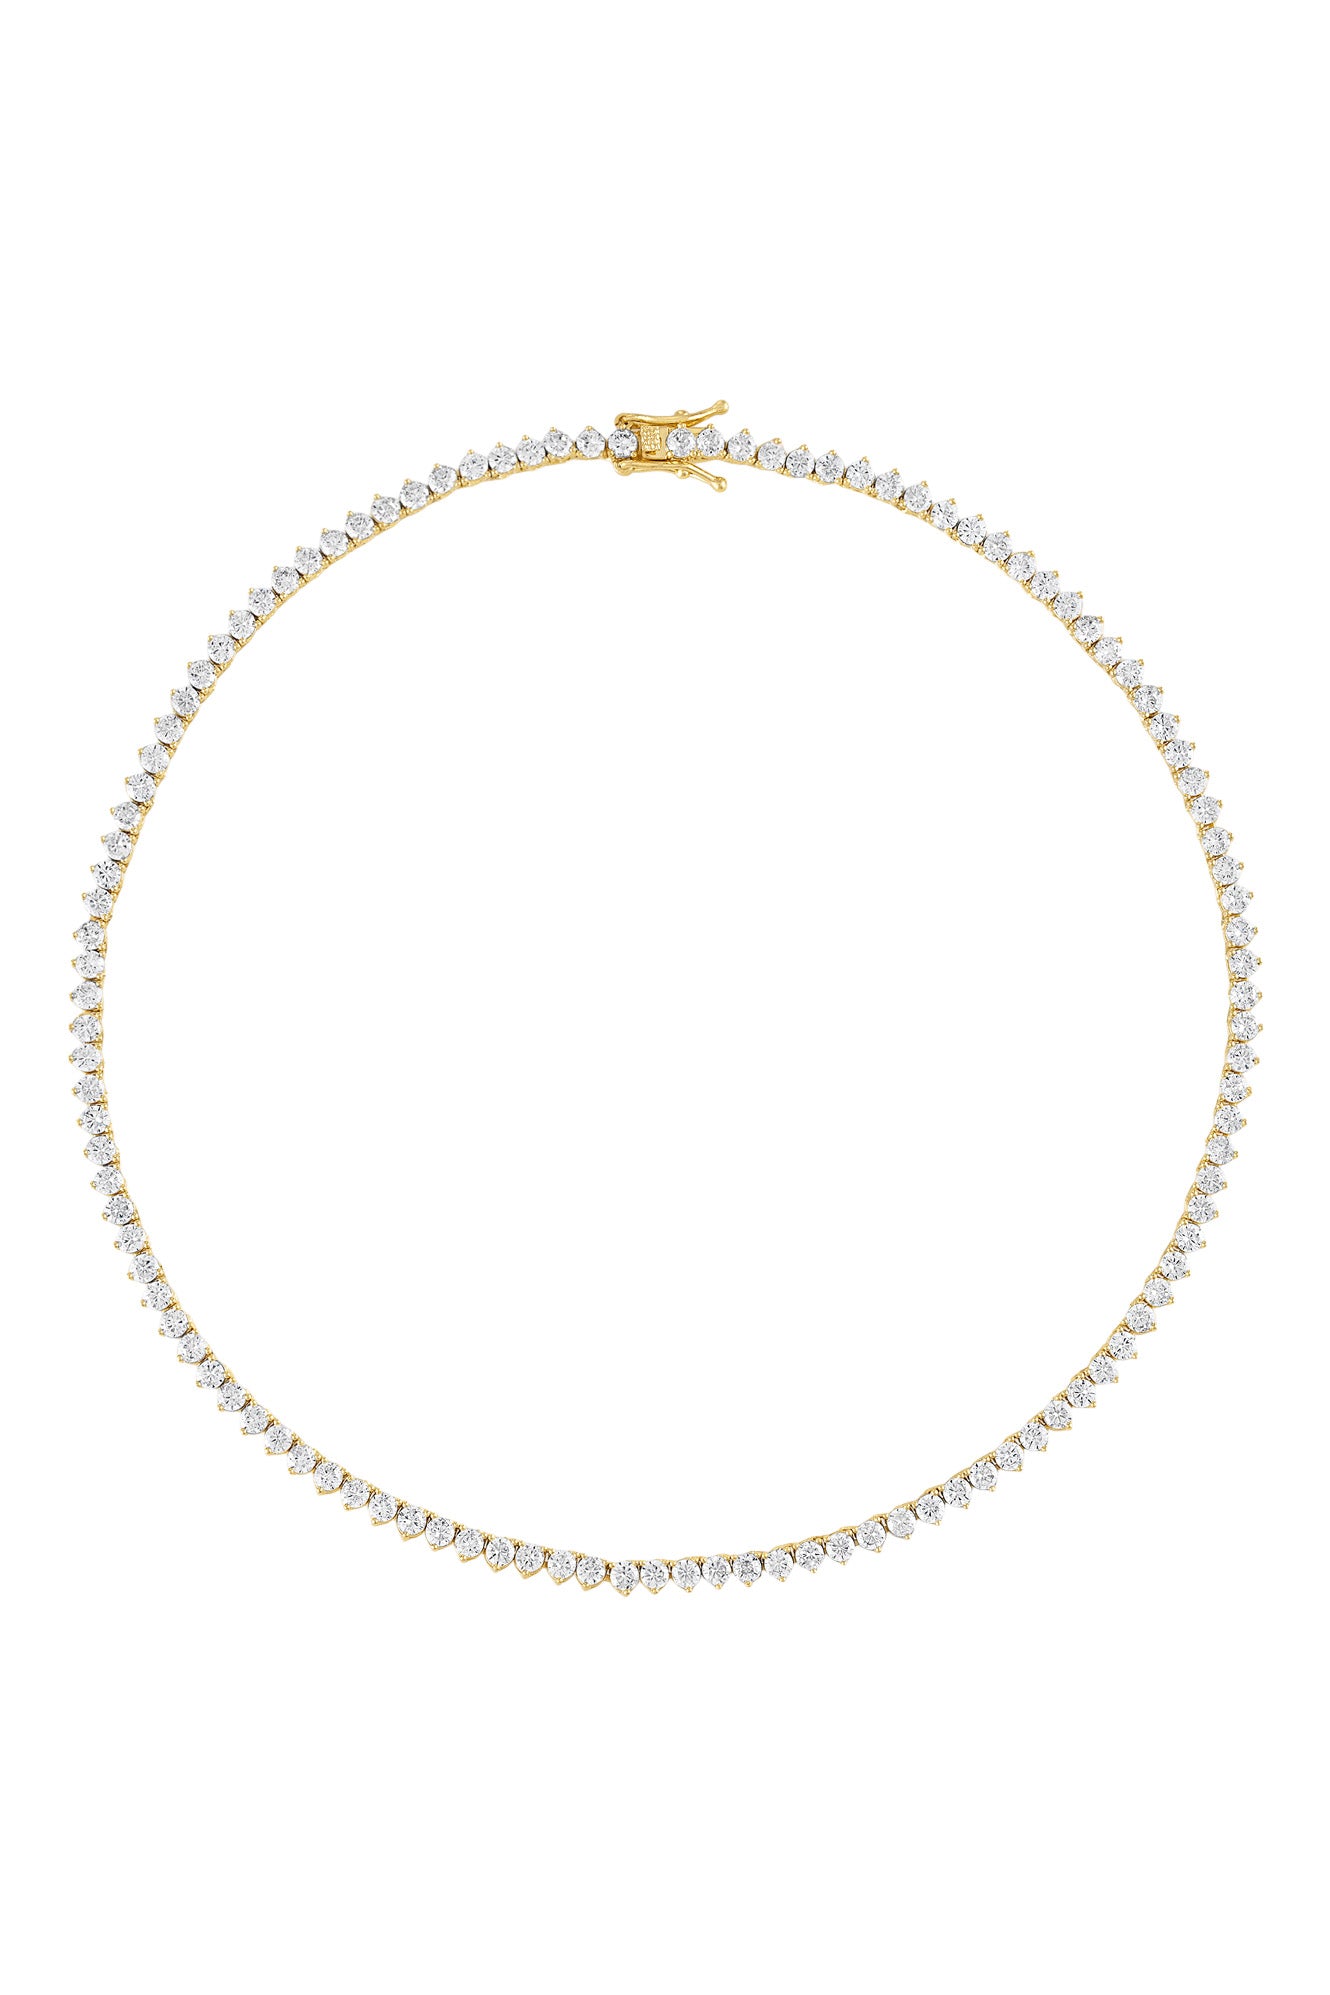 Alexa Leigh Crystal Tennis Necklace in Yellow Gold